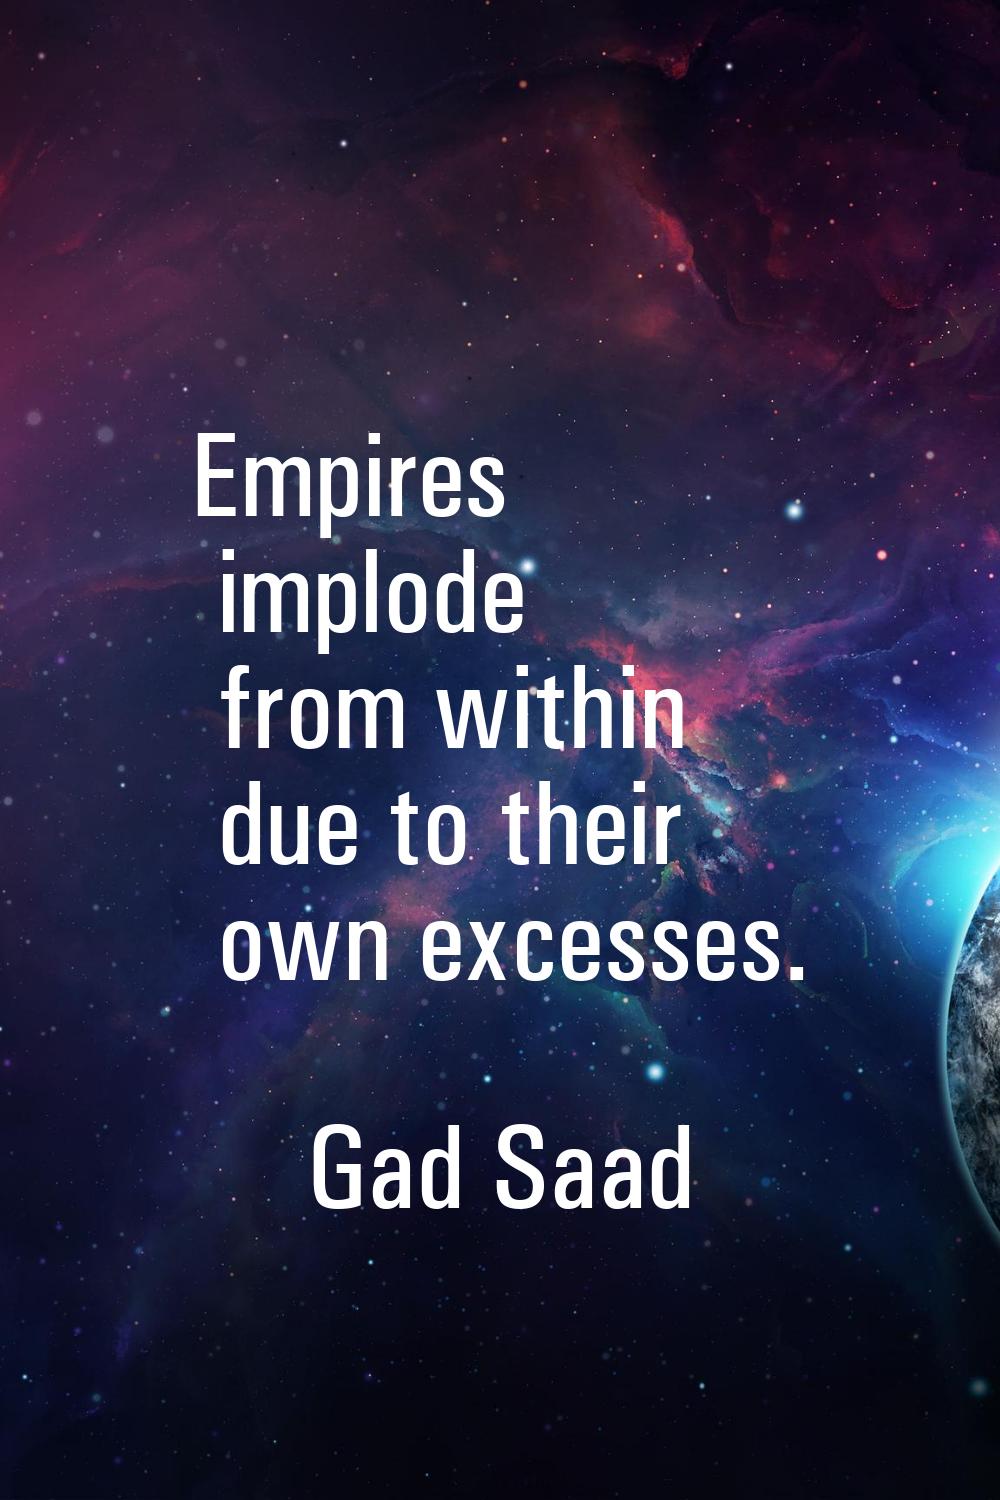 Empires implode from within due to their own excesses.